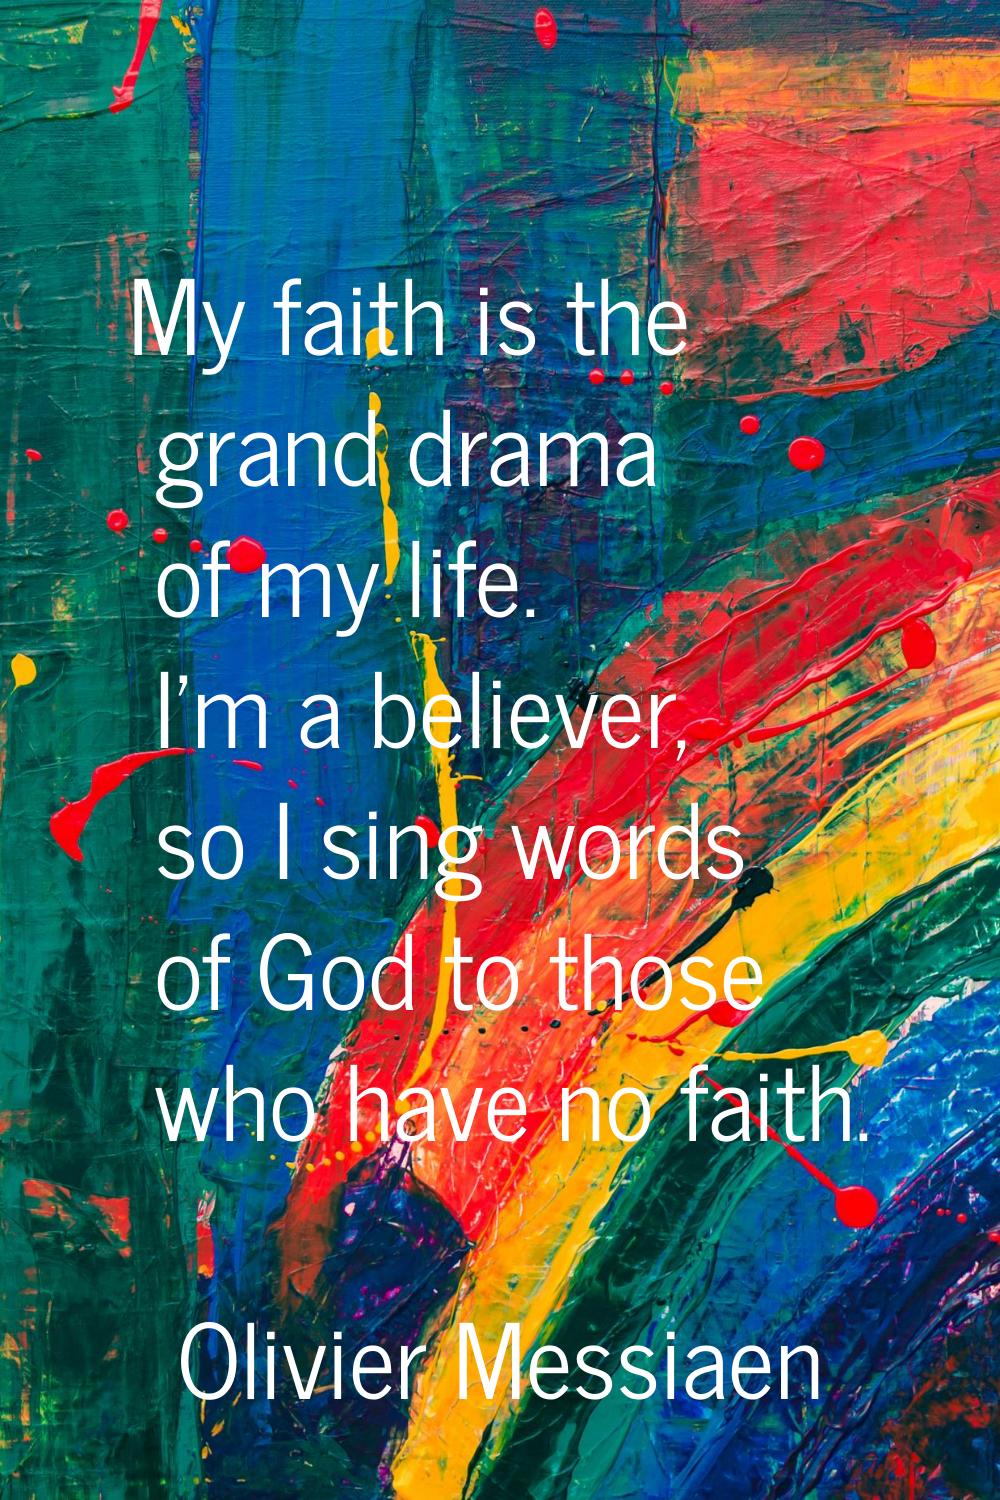 My faith is the grand drama of my life. I'm a believer, so I sing words of God to those who have no